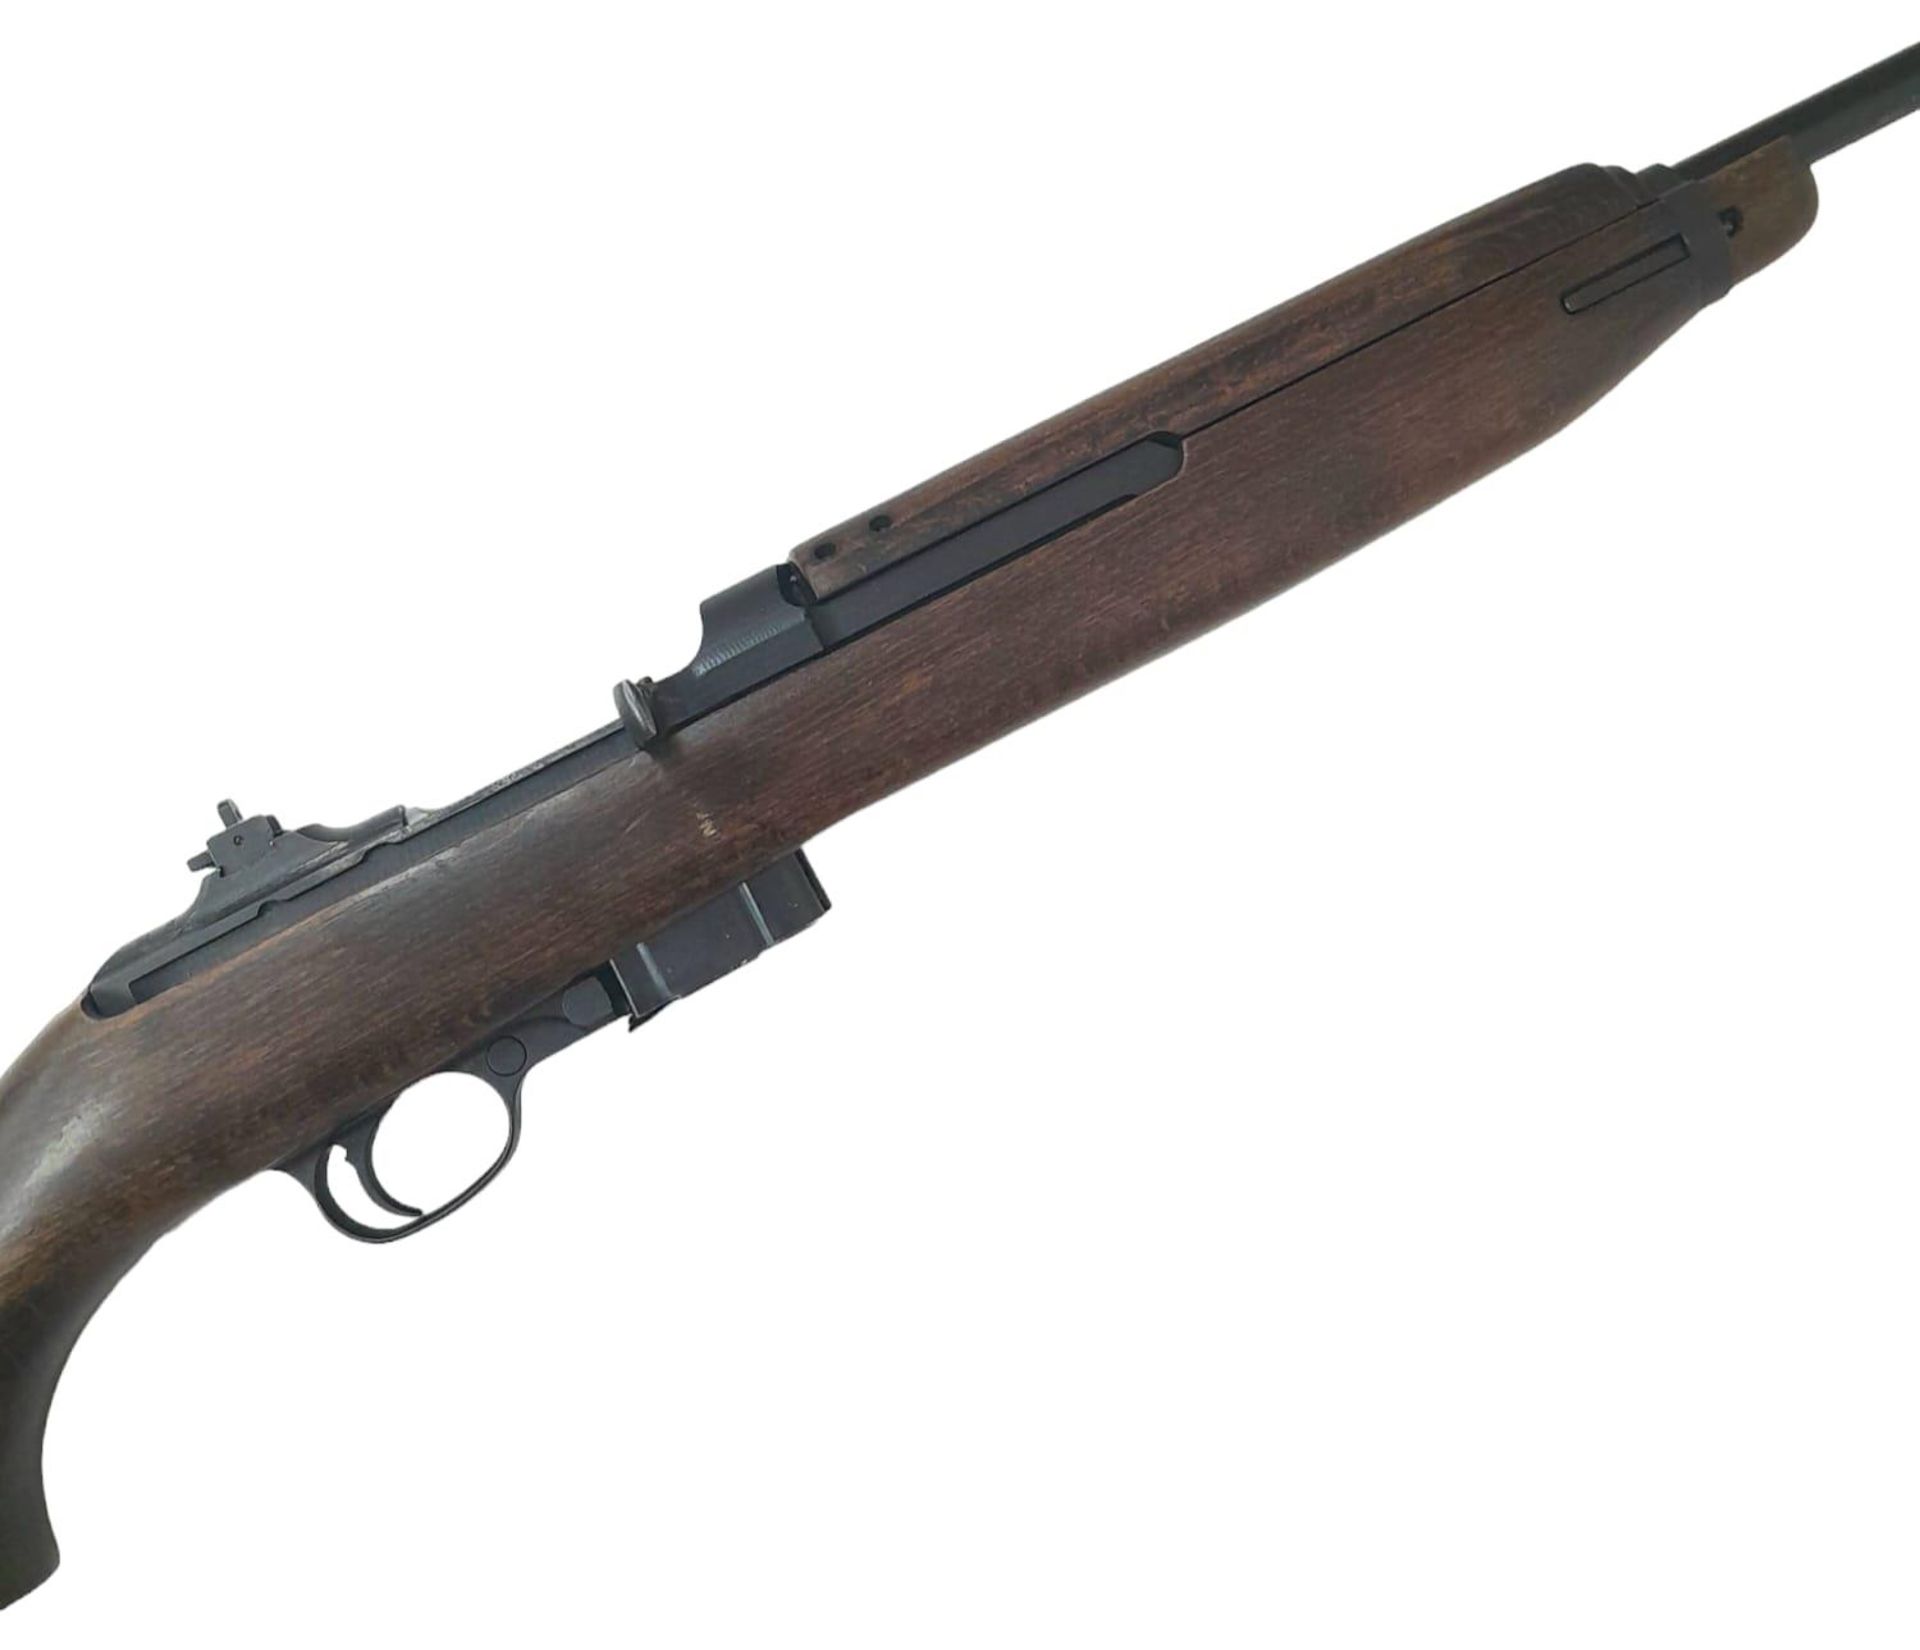 A Deactivated Winchester M1 Carbine Self Loading Rifle. Used by the USA in warfare from 1942-73 this - Bild 7 aus 12